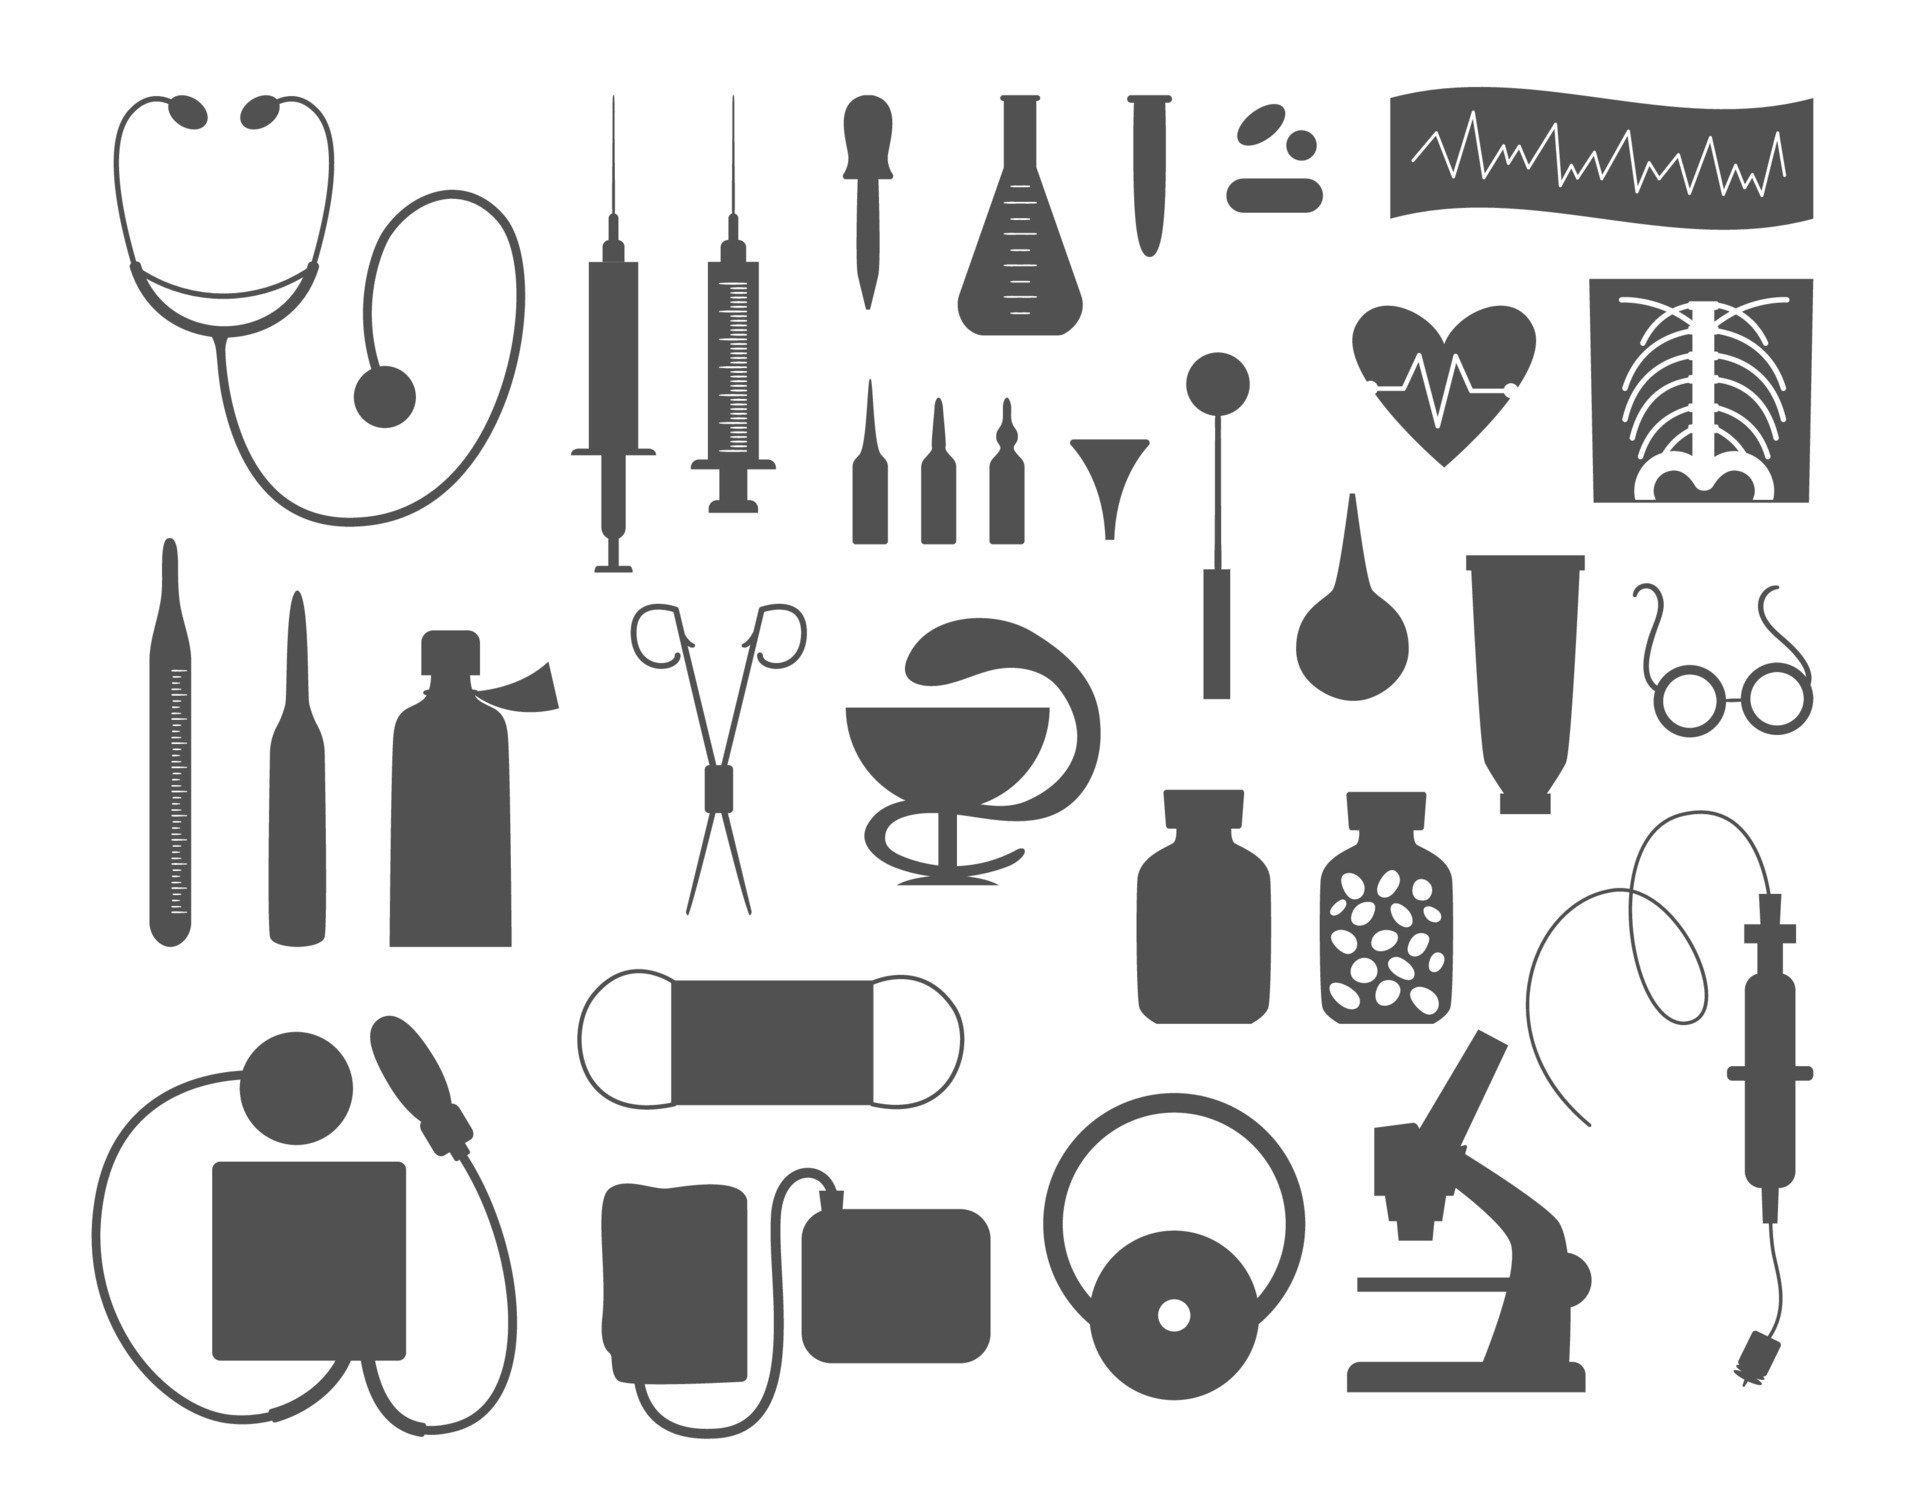 https://static.vecteezy.com/system/resources/previews/006/958/574/original/set-of-flat-medical-silhouette-icons-medicine-or-health-insurance-research-collection-healthcare-and-laboratory-equipment-isolated-on-white-background-health-check-or-treatment-clip-art-vector.jpg